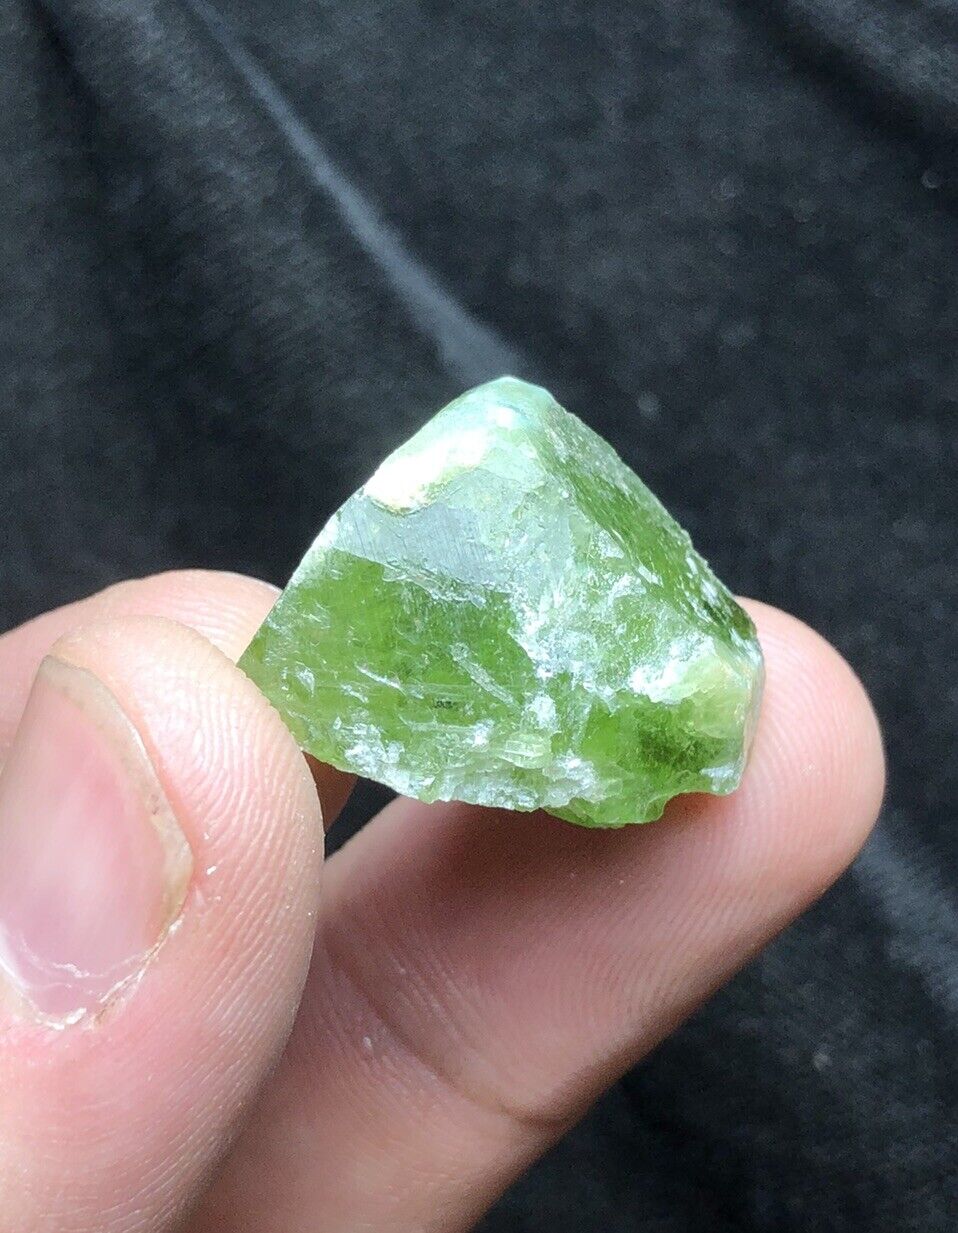 60 Crt / Beautiful Natural Diopside Crystal from Afghanistan Mine,